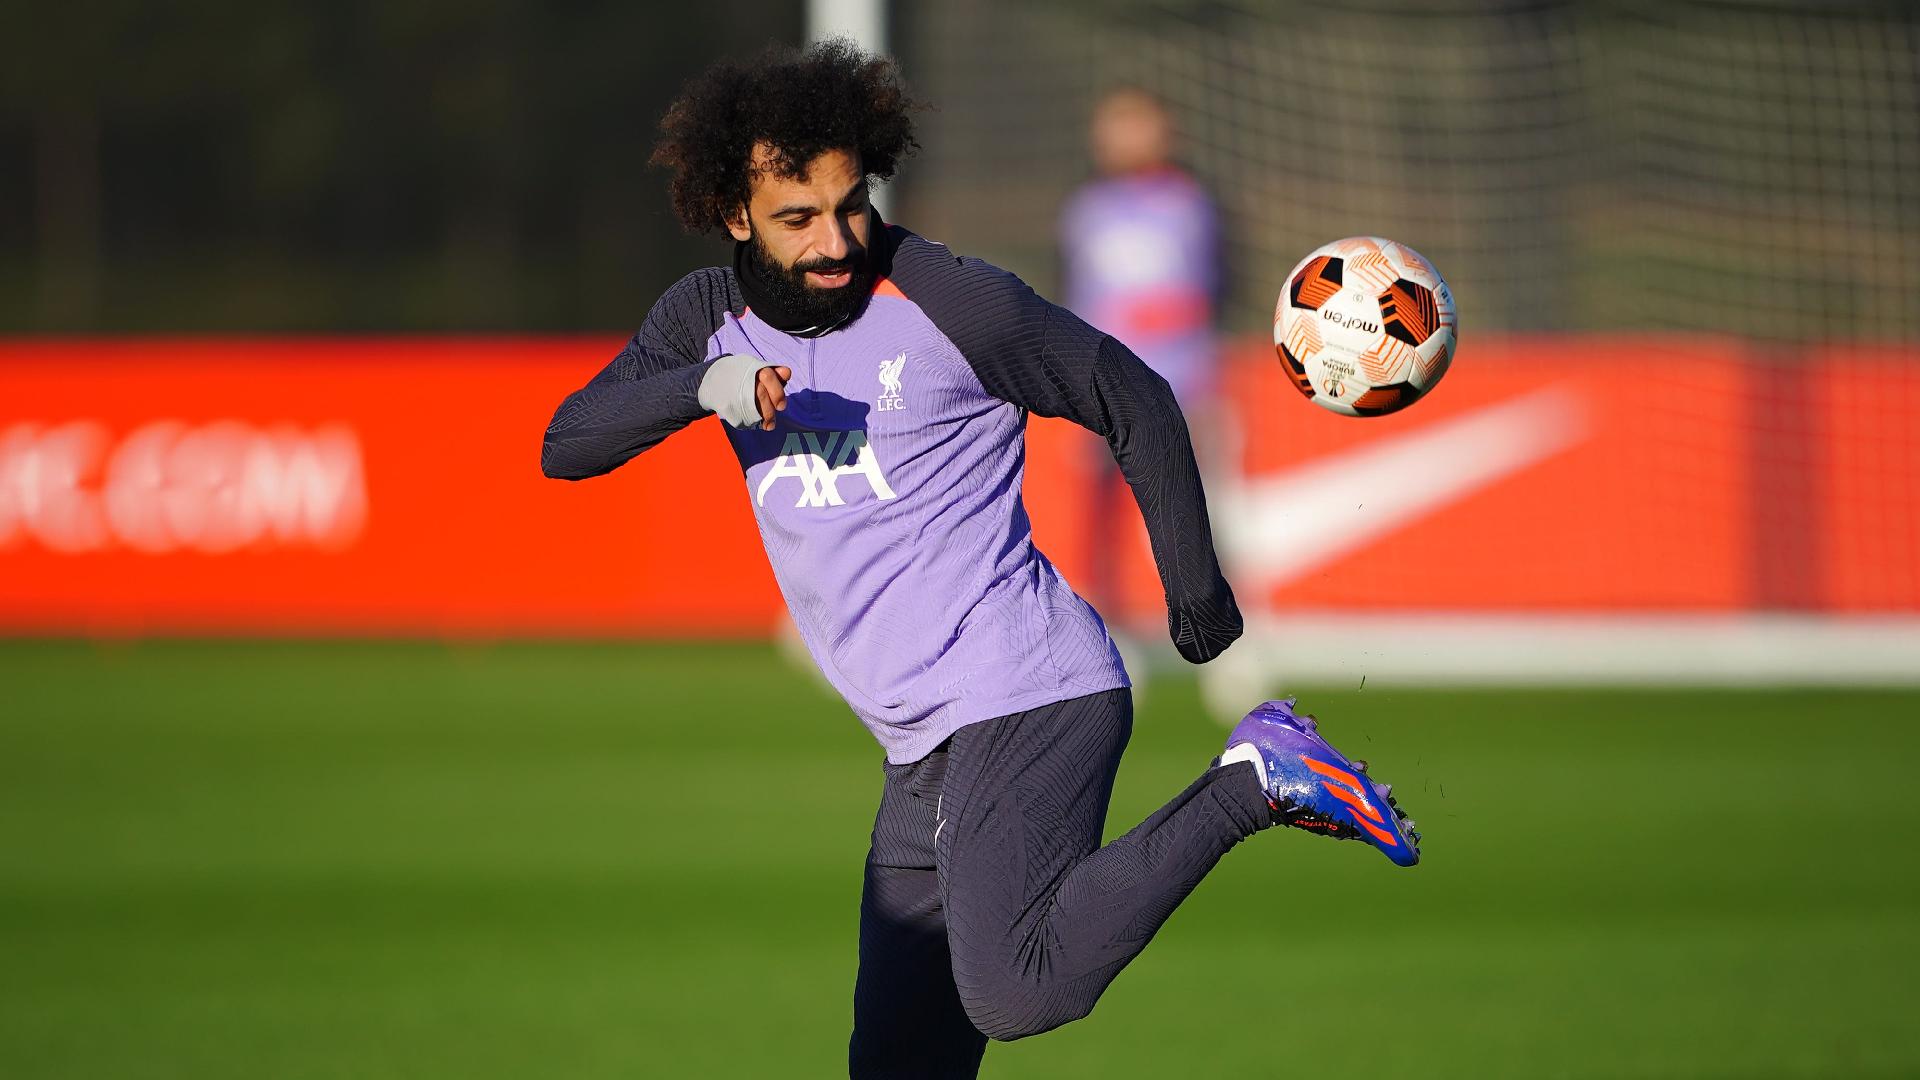 Liverpool’s Mohamed Salah during a training session (Peter Byrne/PA Wire)